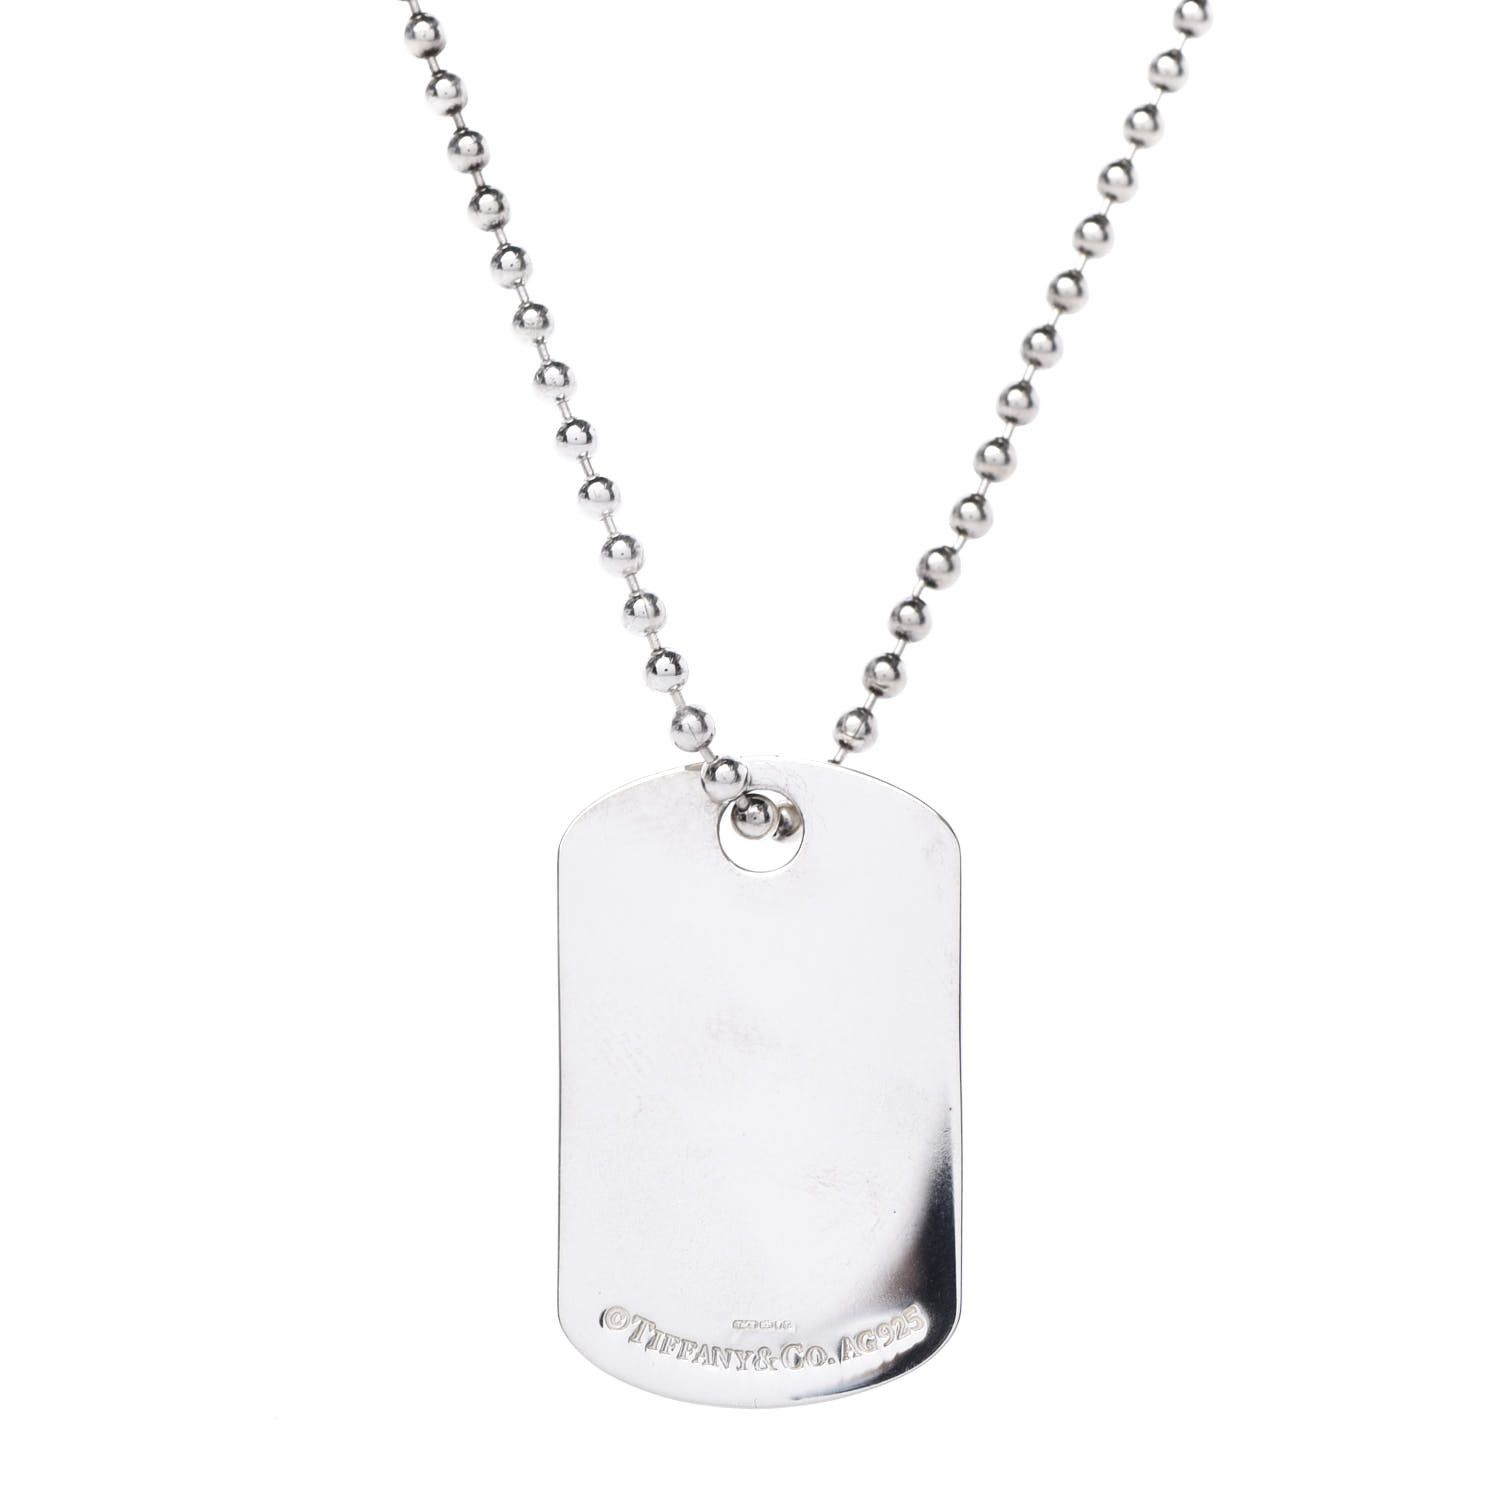 TIFFANY Sterling Silver 1837 Dog Tag Pendant Necklace 615618 | FASHIONPHILE